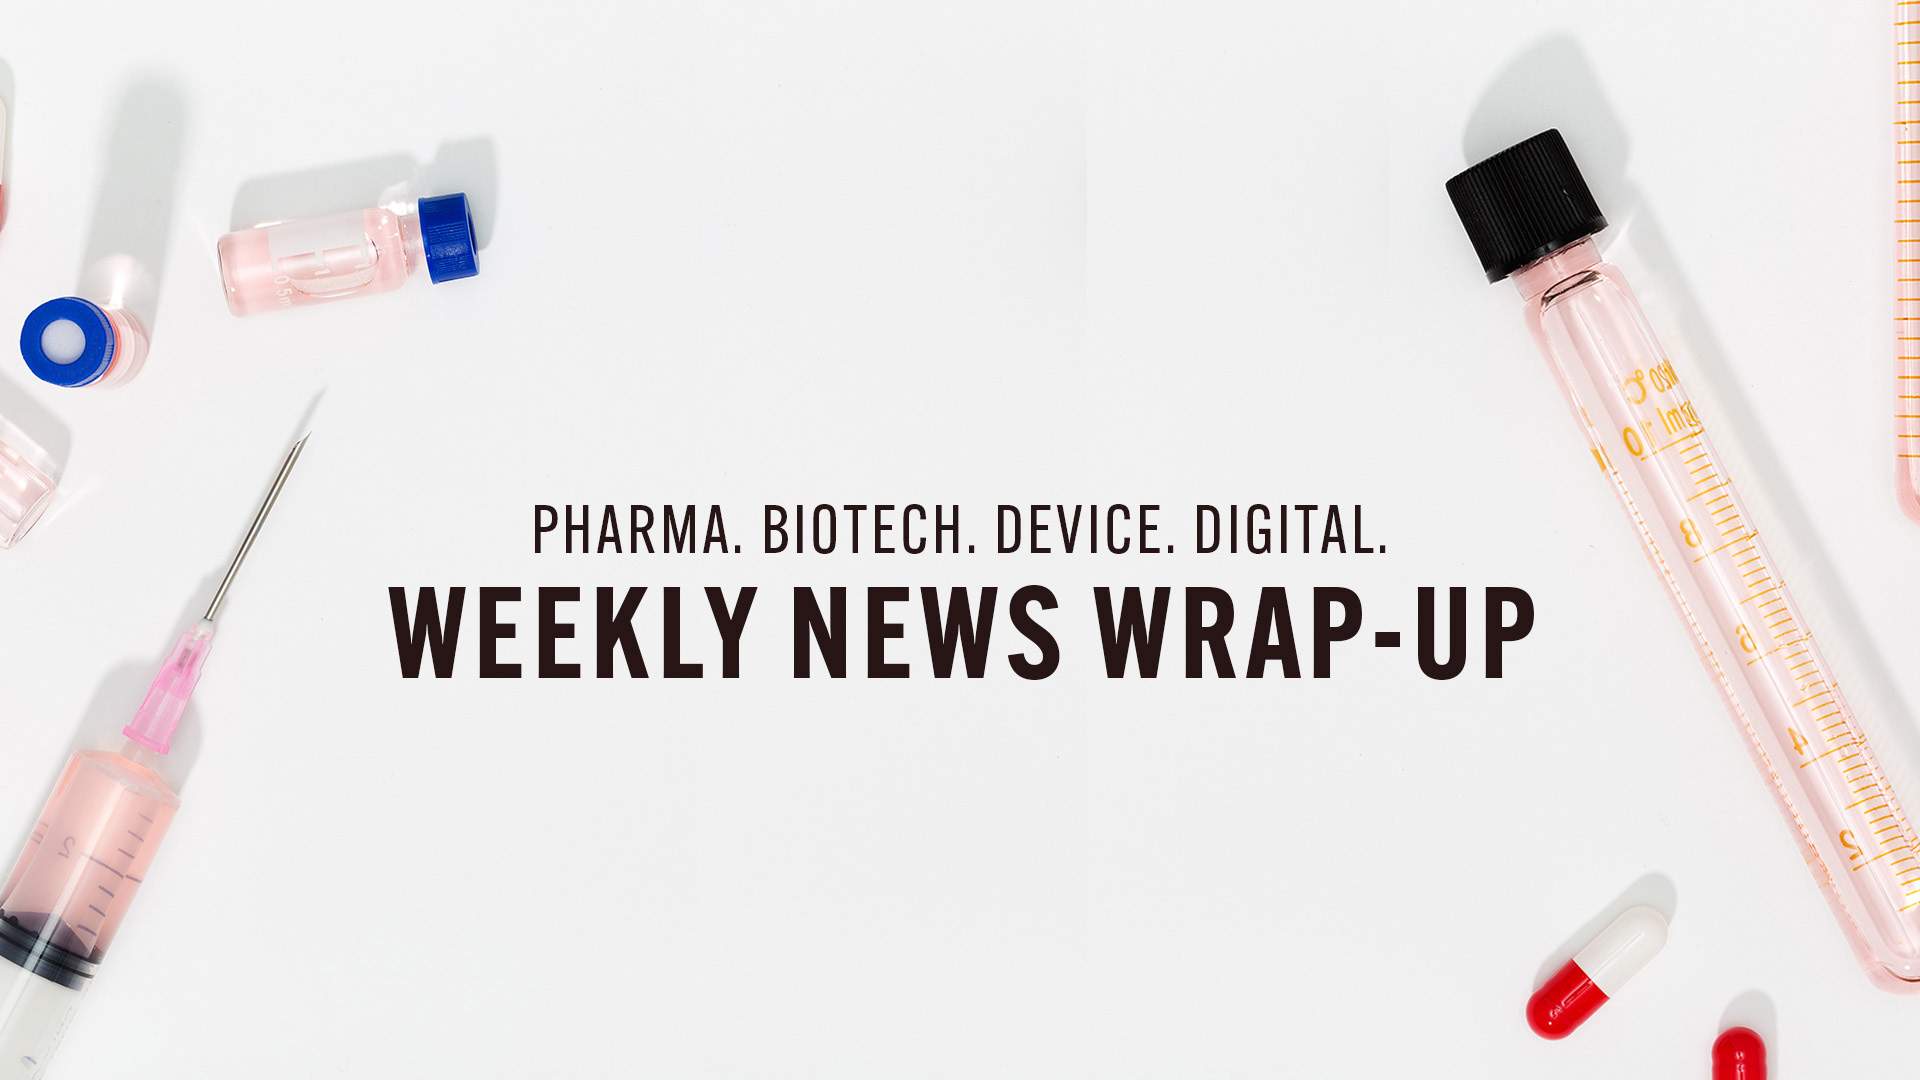 Healthcare Industry News Weekly Wrap-Up: October 21, 2022